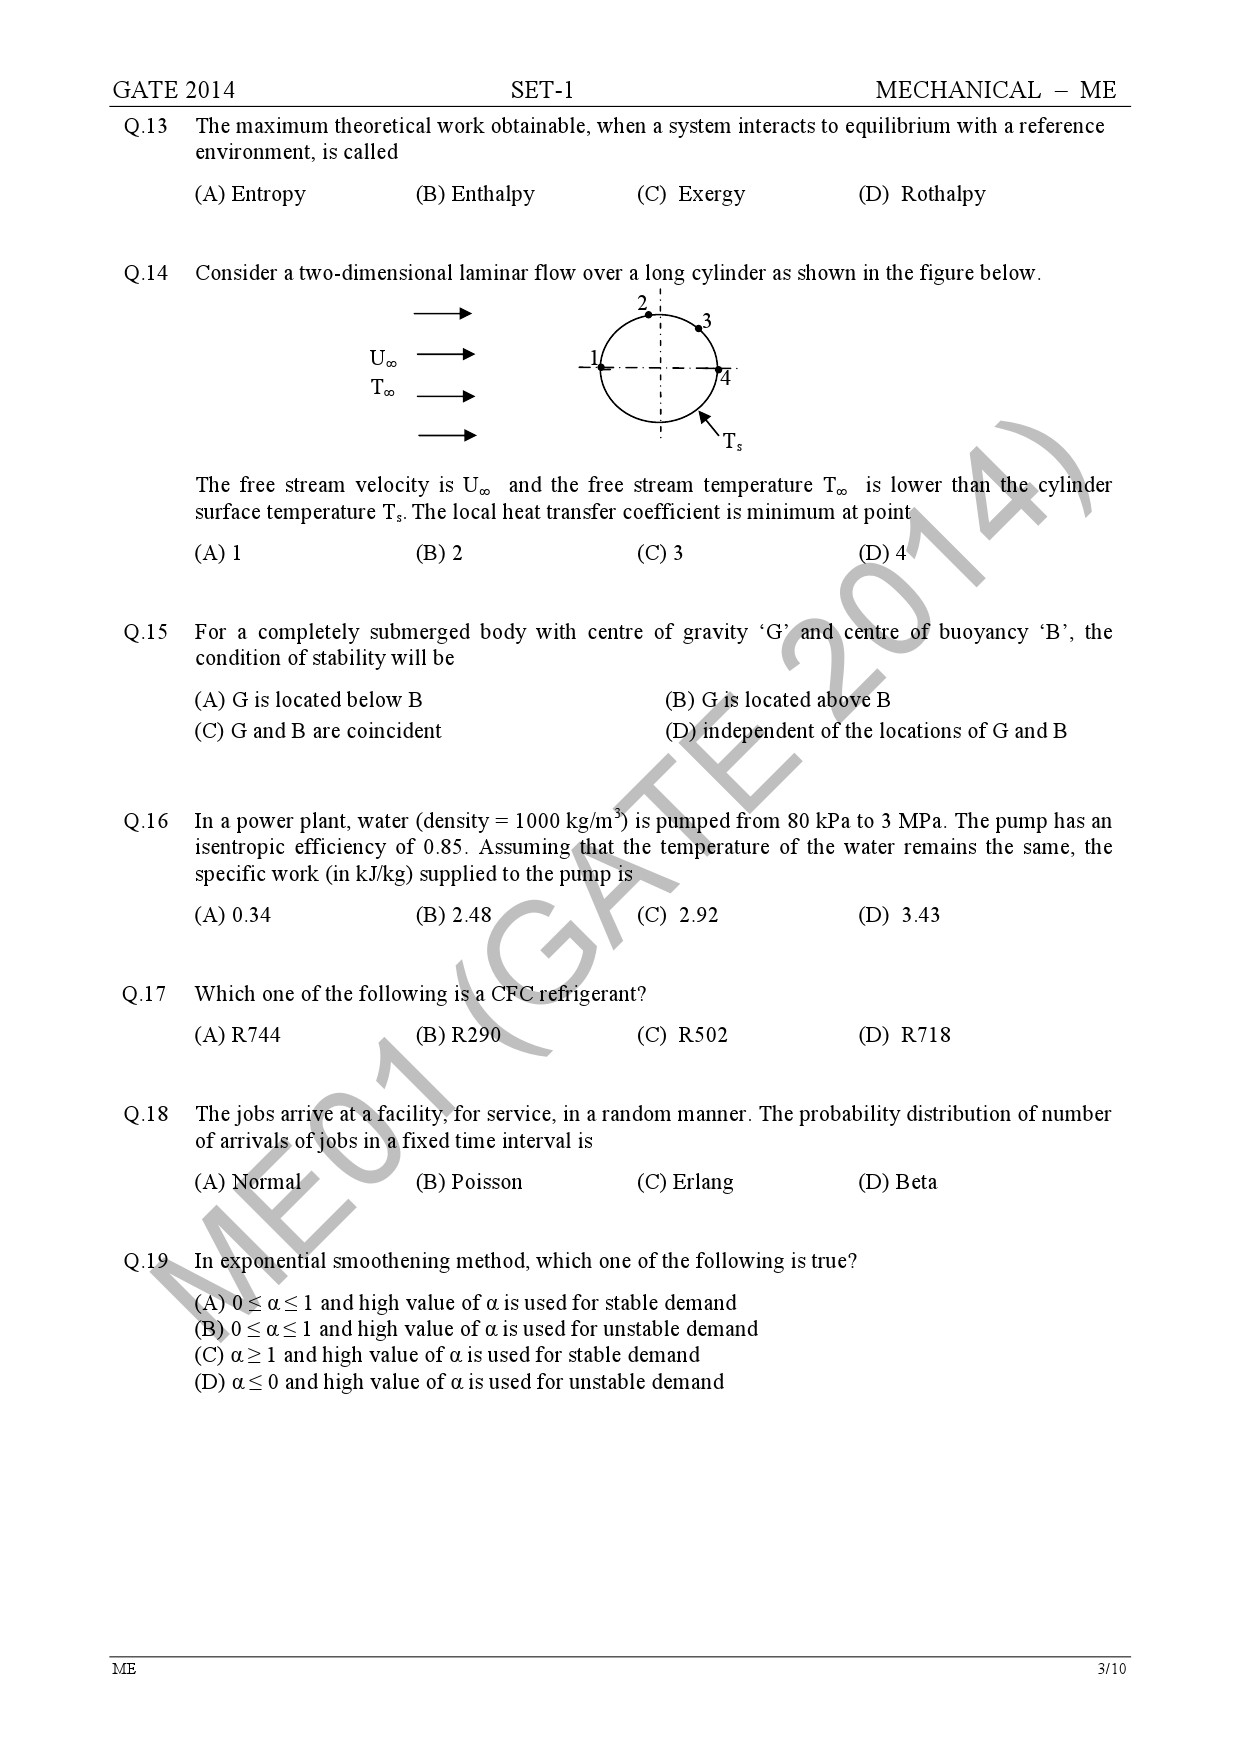 GATE Exam Question Paper 2014 Mechanical Engineering Set 1 9